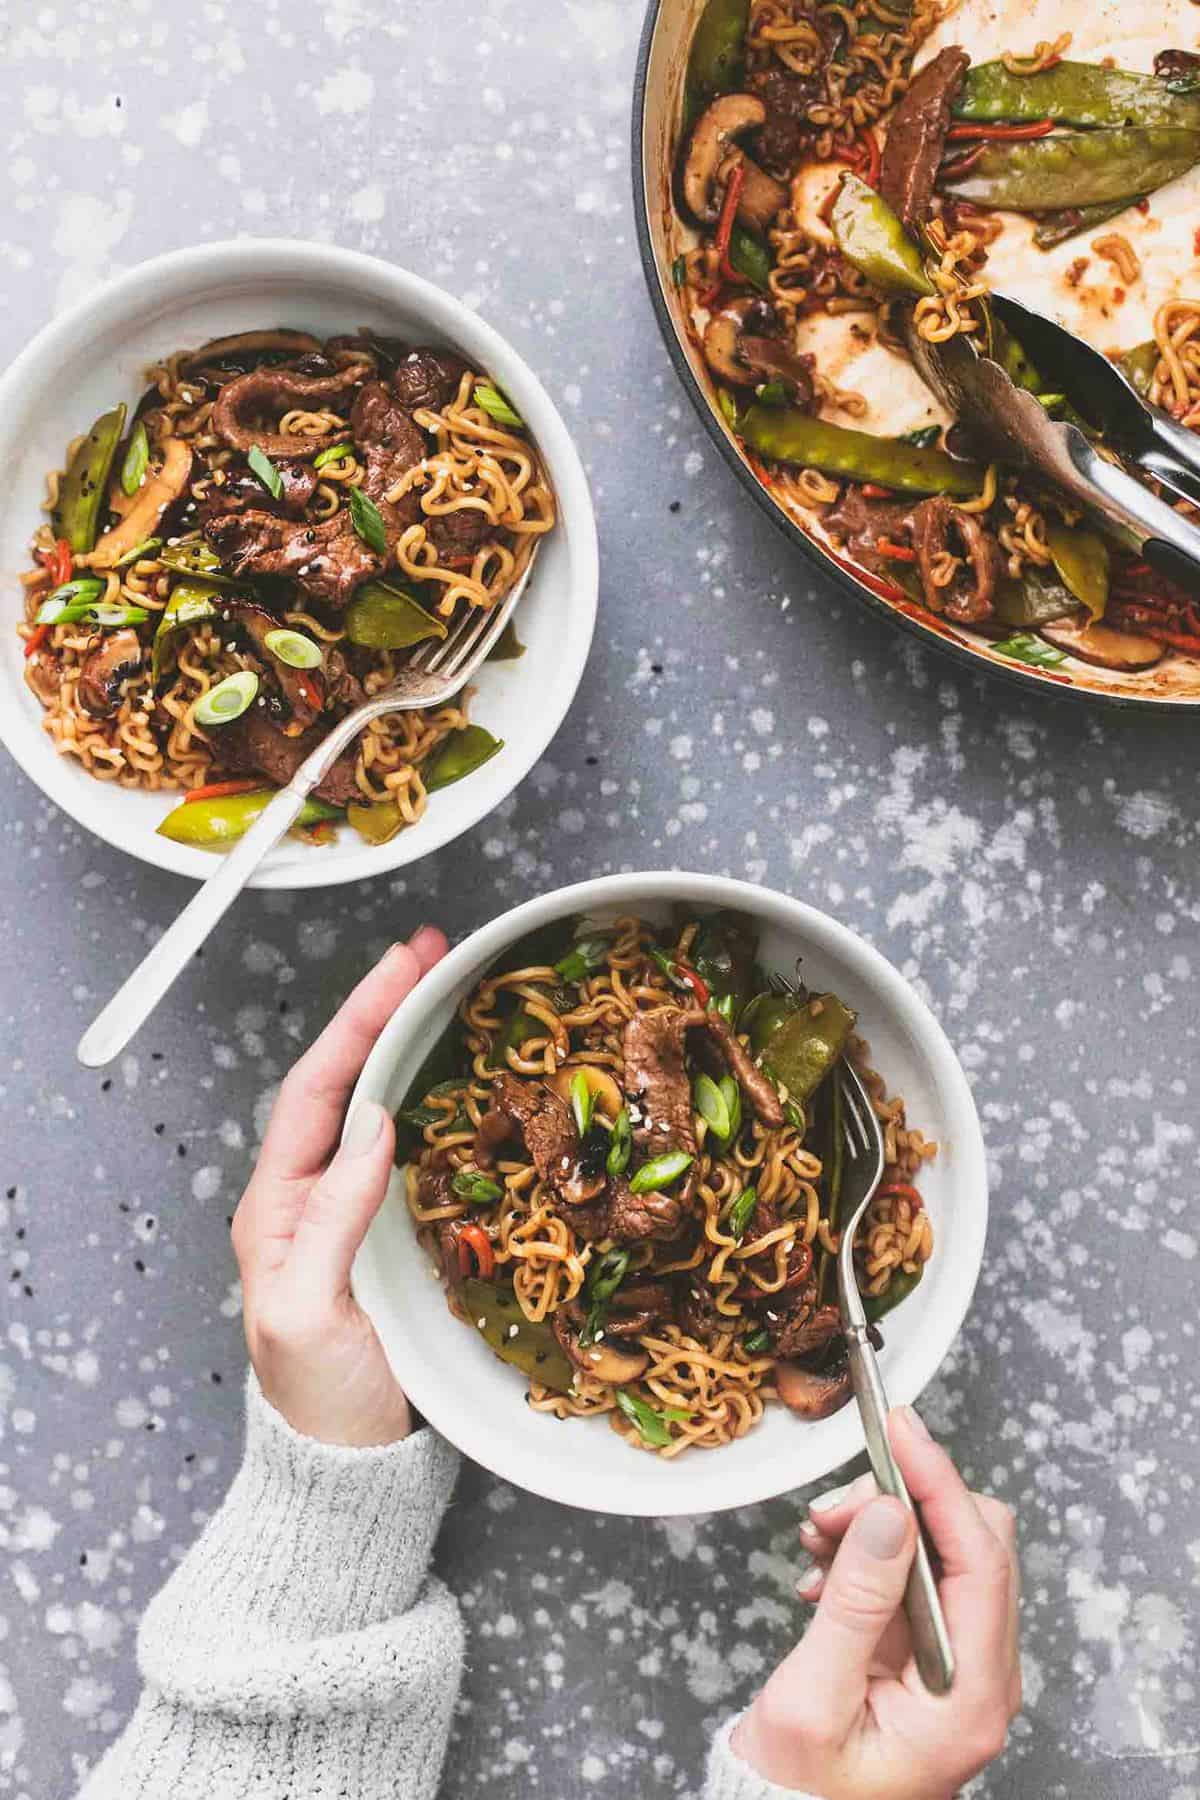 top view of a hand holding the side of a bowl with beef noodle stir fry in it and holding a fork with the other hand with another bowl and pan of stir fry on the side.